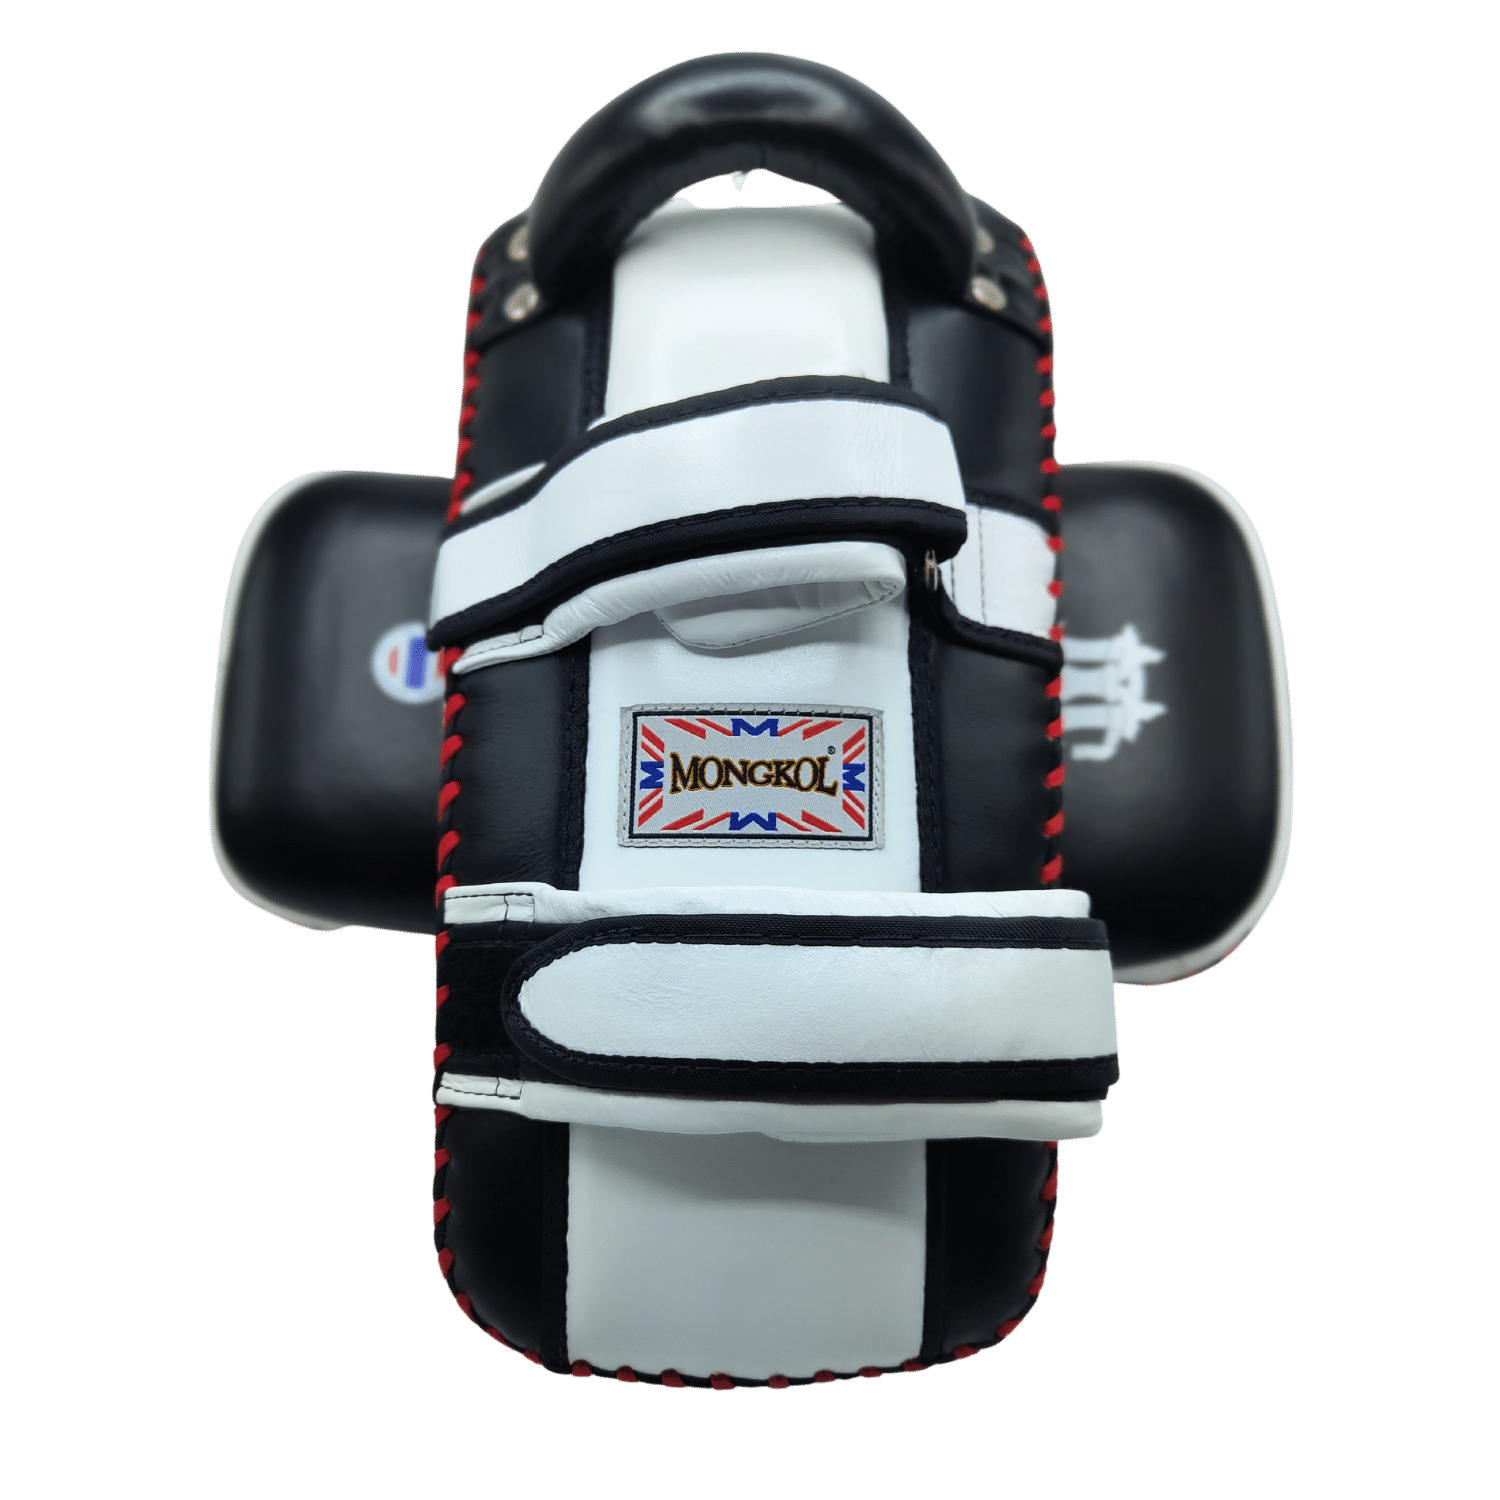 A Monkol Leather Thai Kick Pads - Black & White with red and white stripes. (Brand: alsgym)